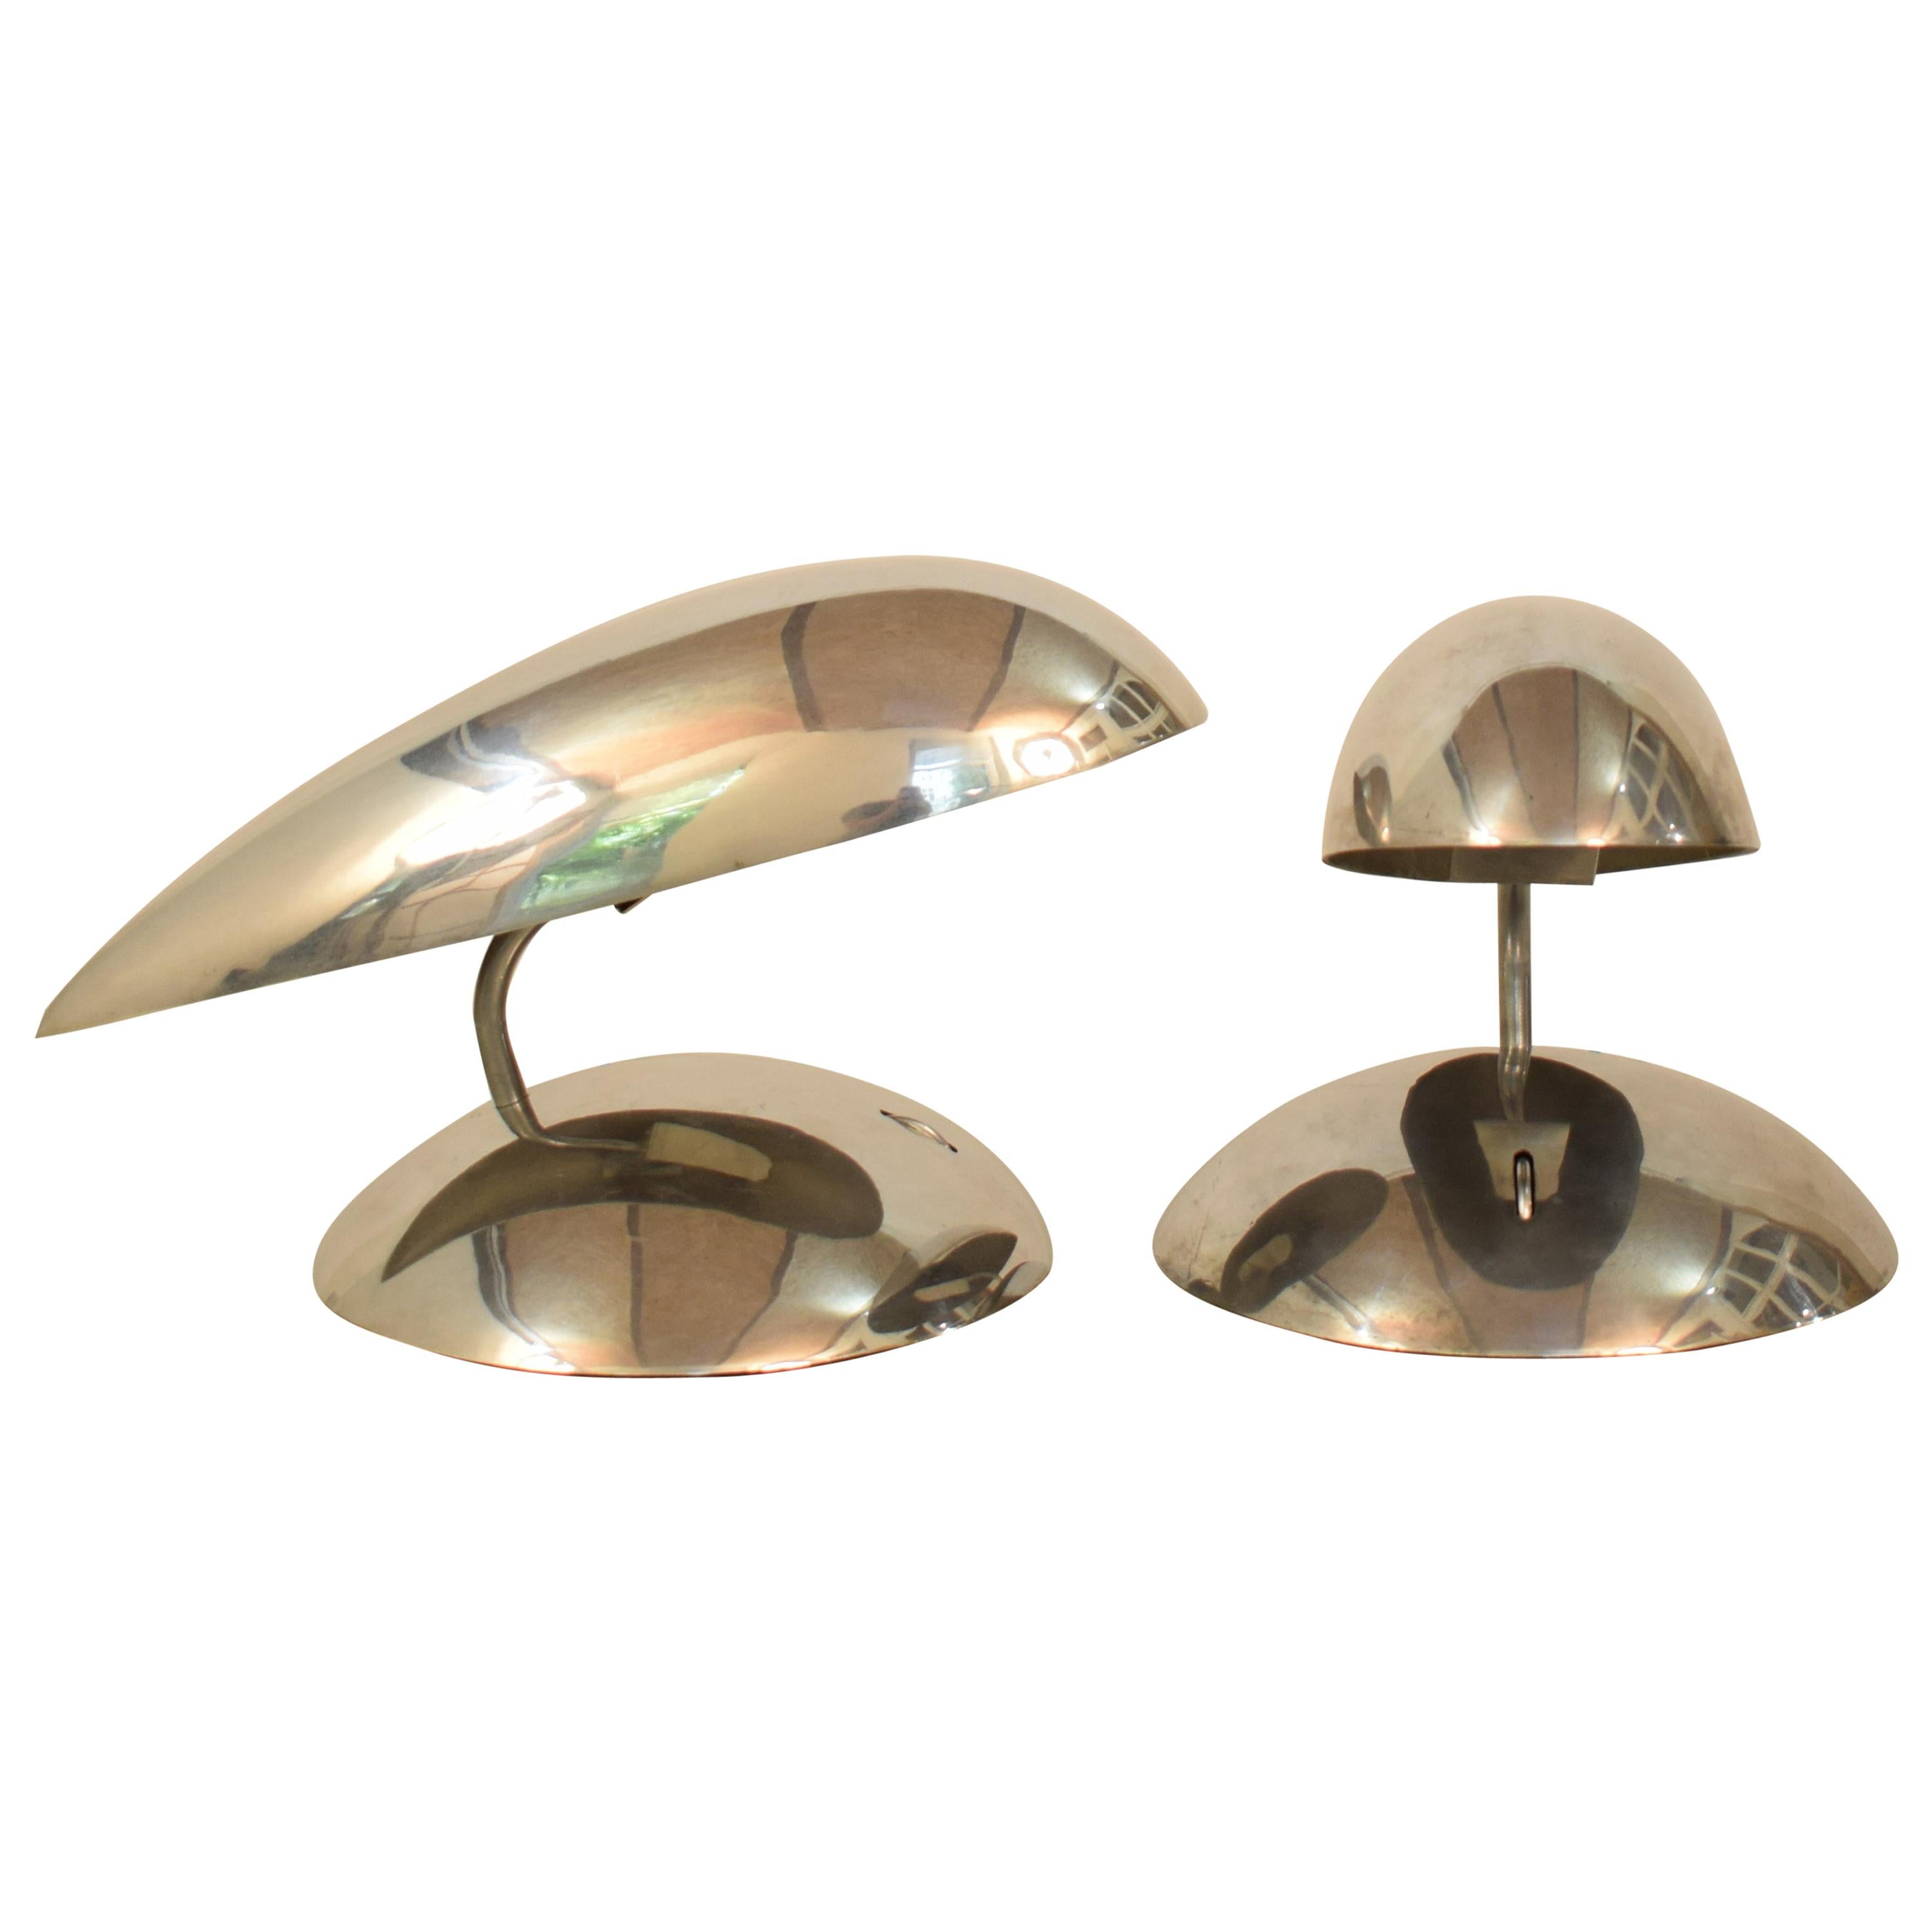 Pair of Polished Aluminium Space Age / Mid Century Table Lamps from the 1980s